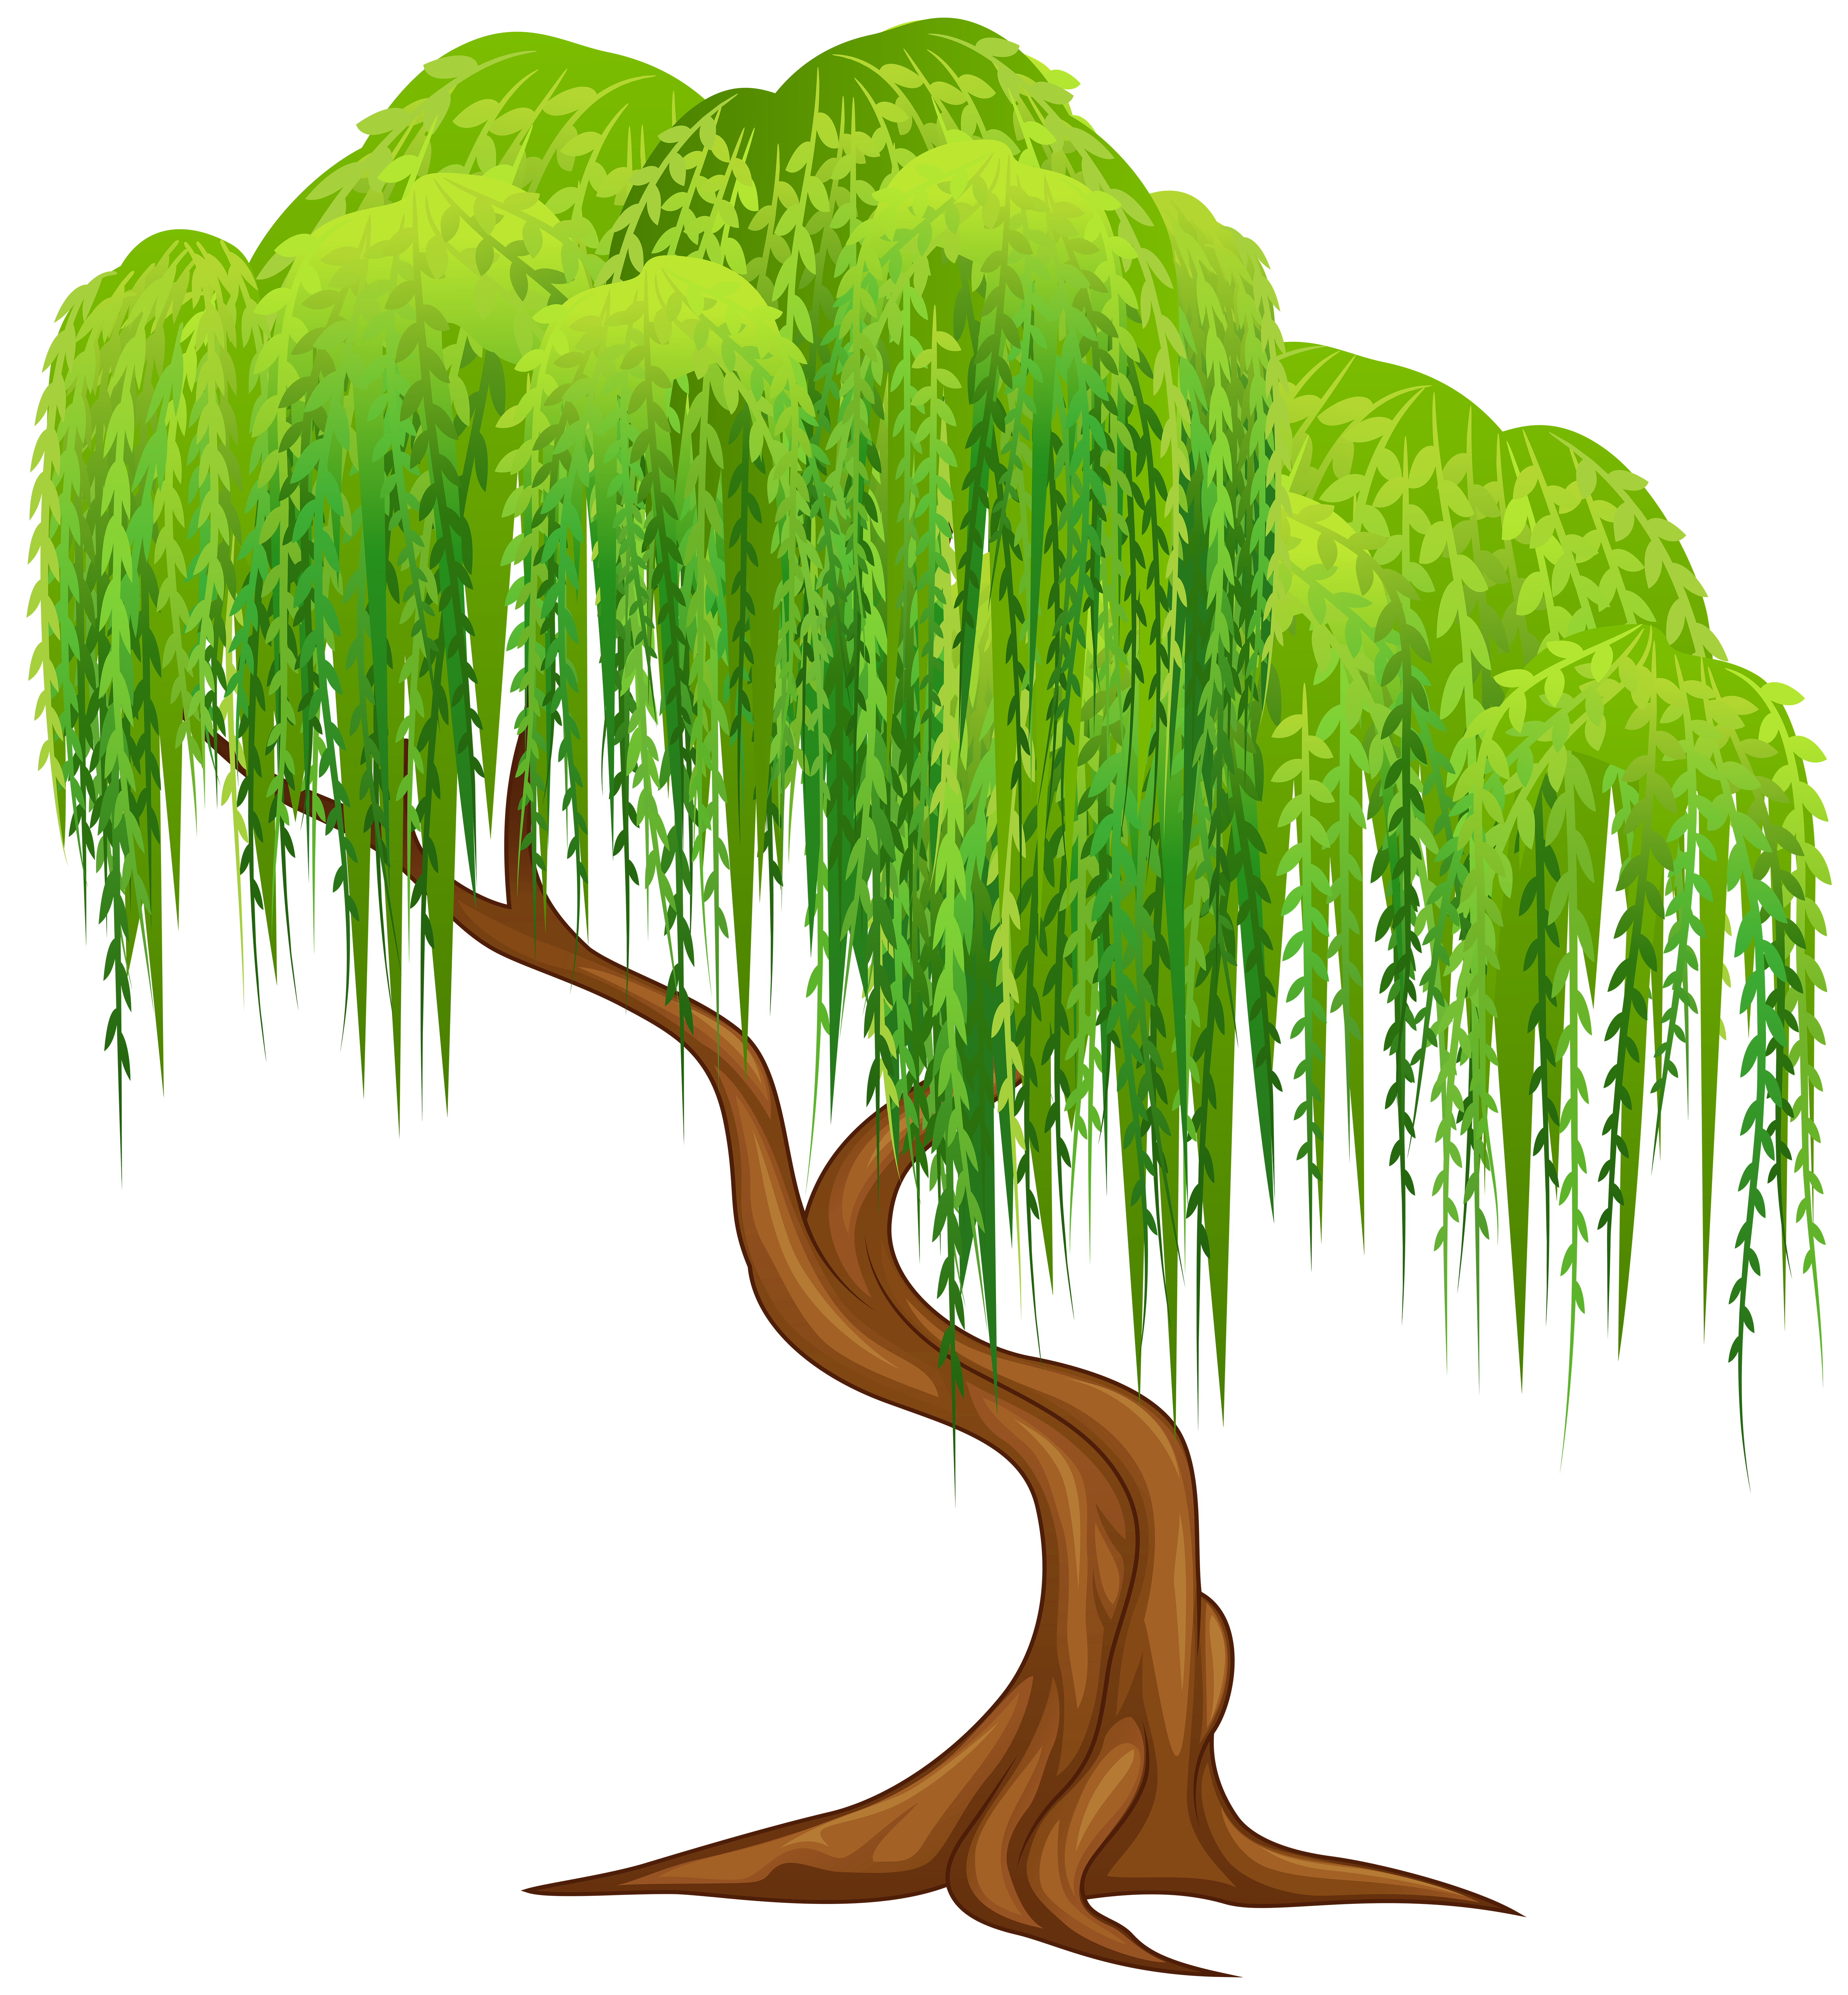 willow tree clip art images - photo #3